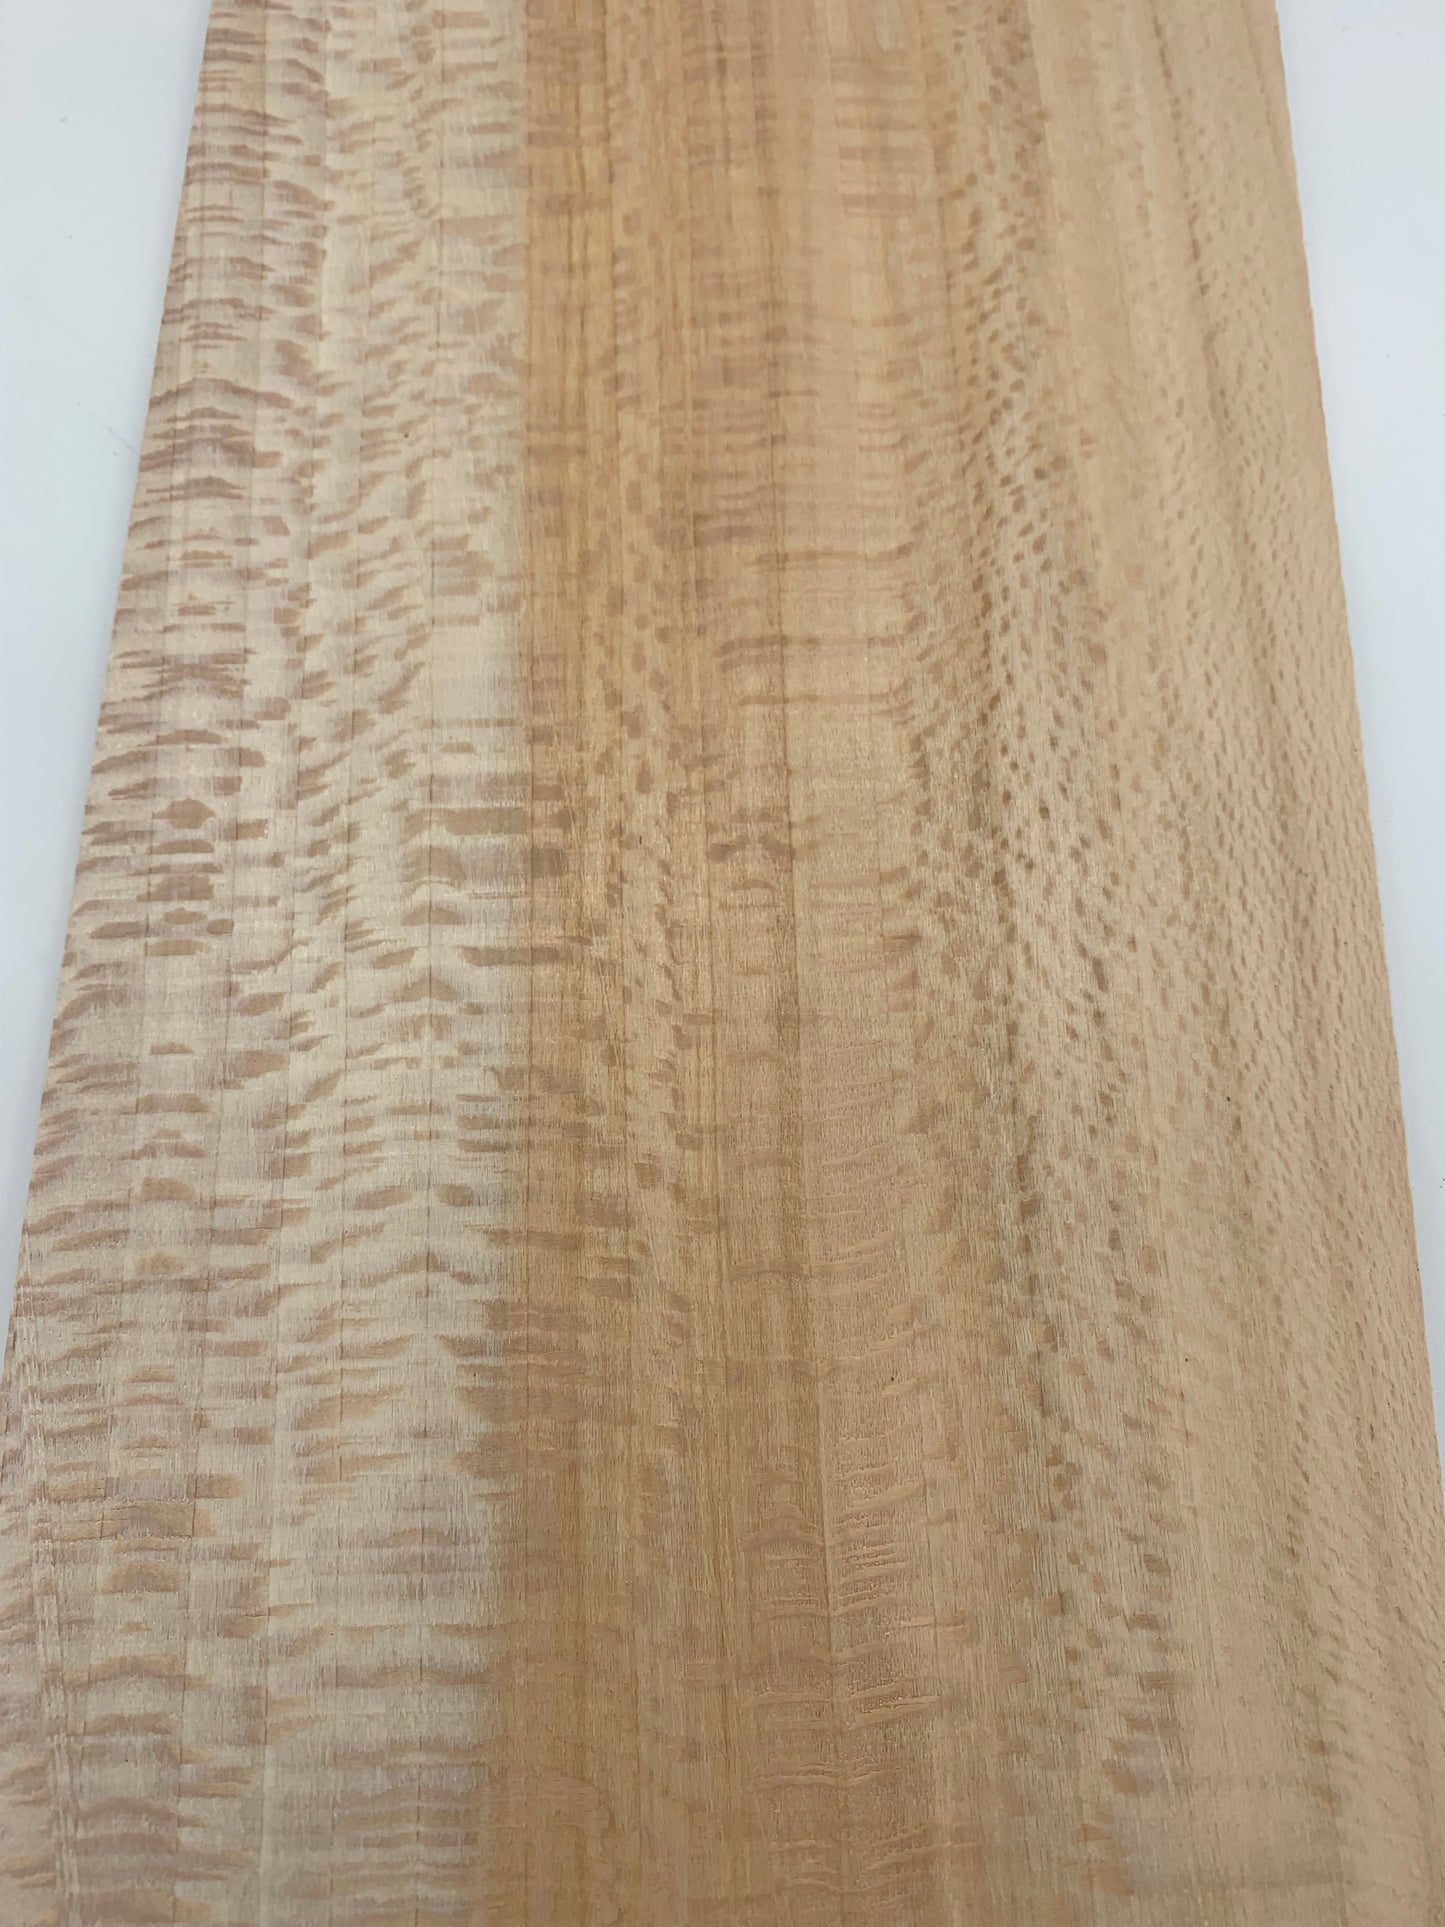 1/8 HARDWOOD Rejects, 30% off normal price.   PLEASE READ PRODUCT DESCRIPTION